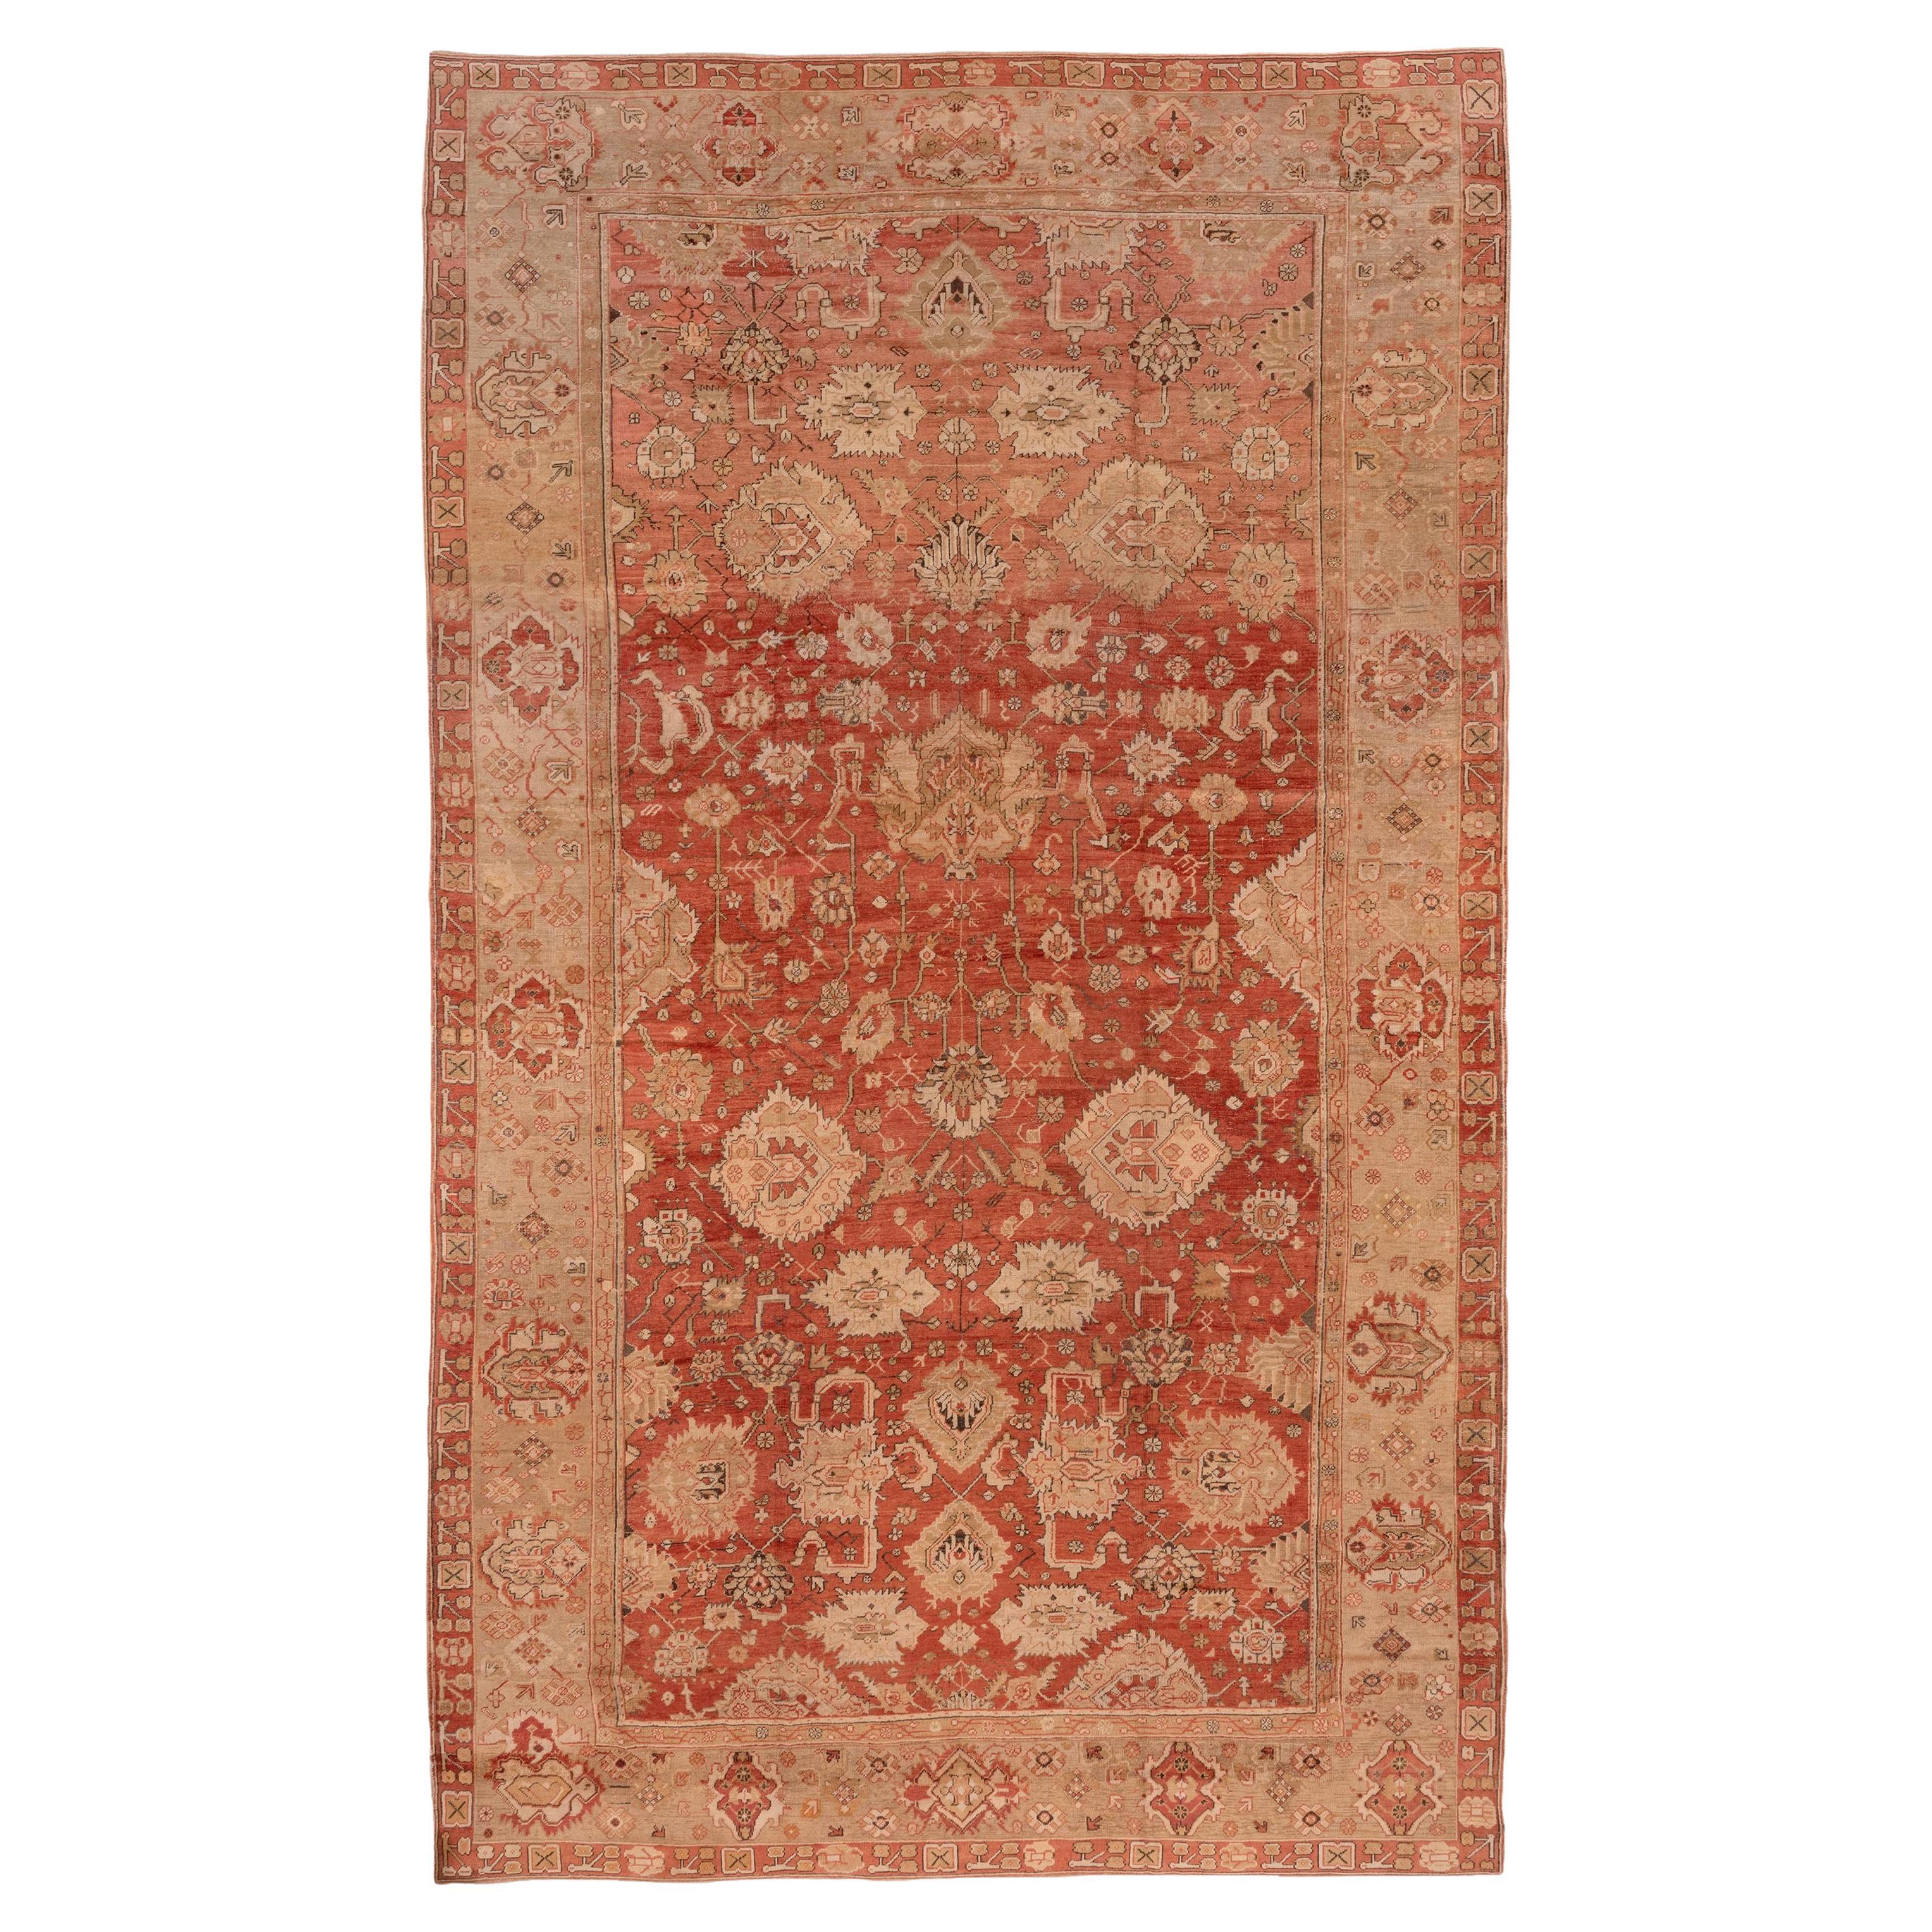 Stunning Antique Turkish Oushak Mansion Carpet, Rust Field, Pale Green Borders For Sale